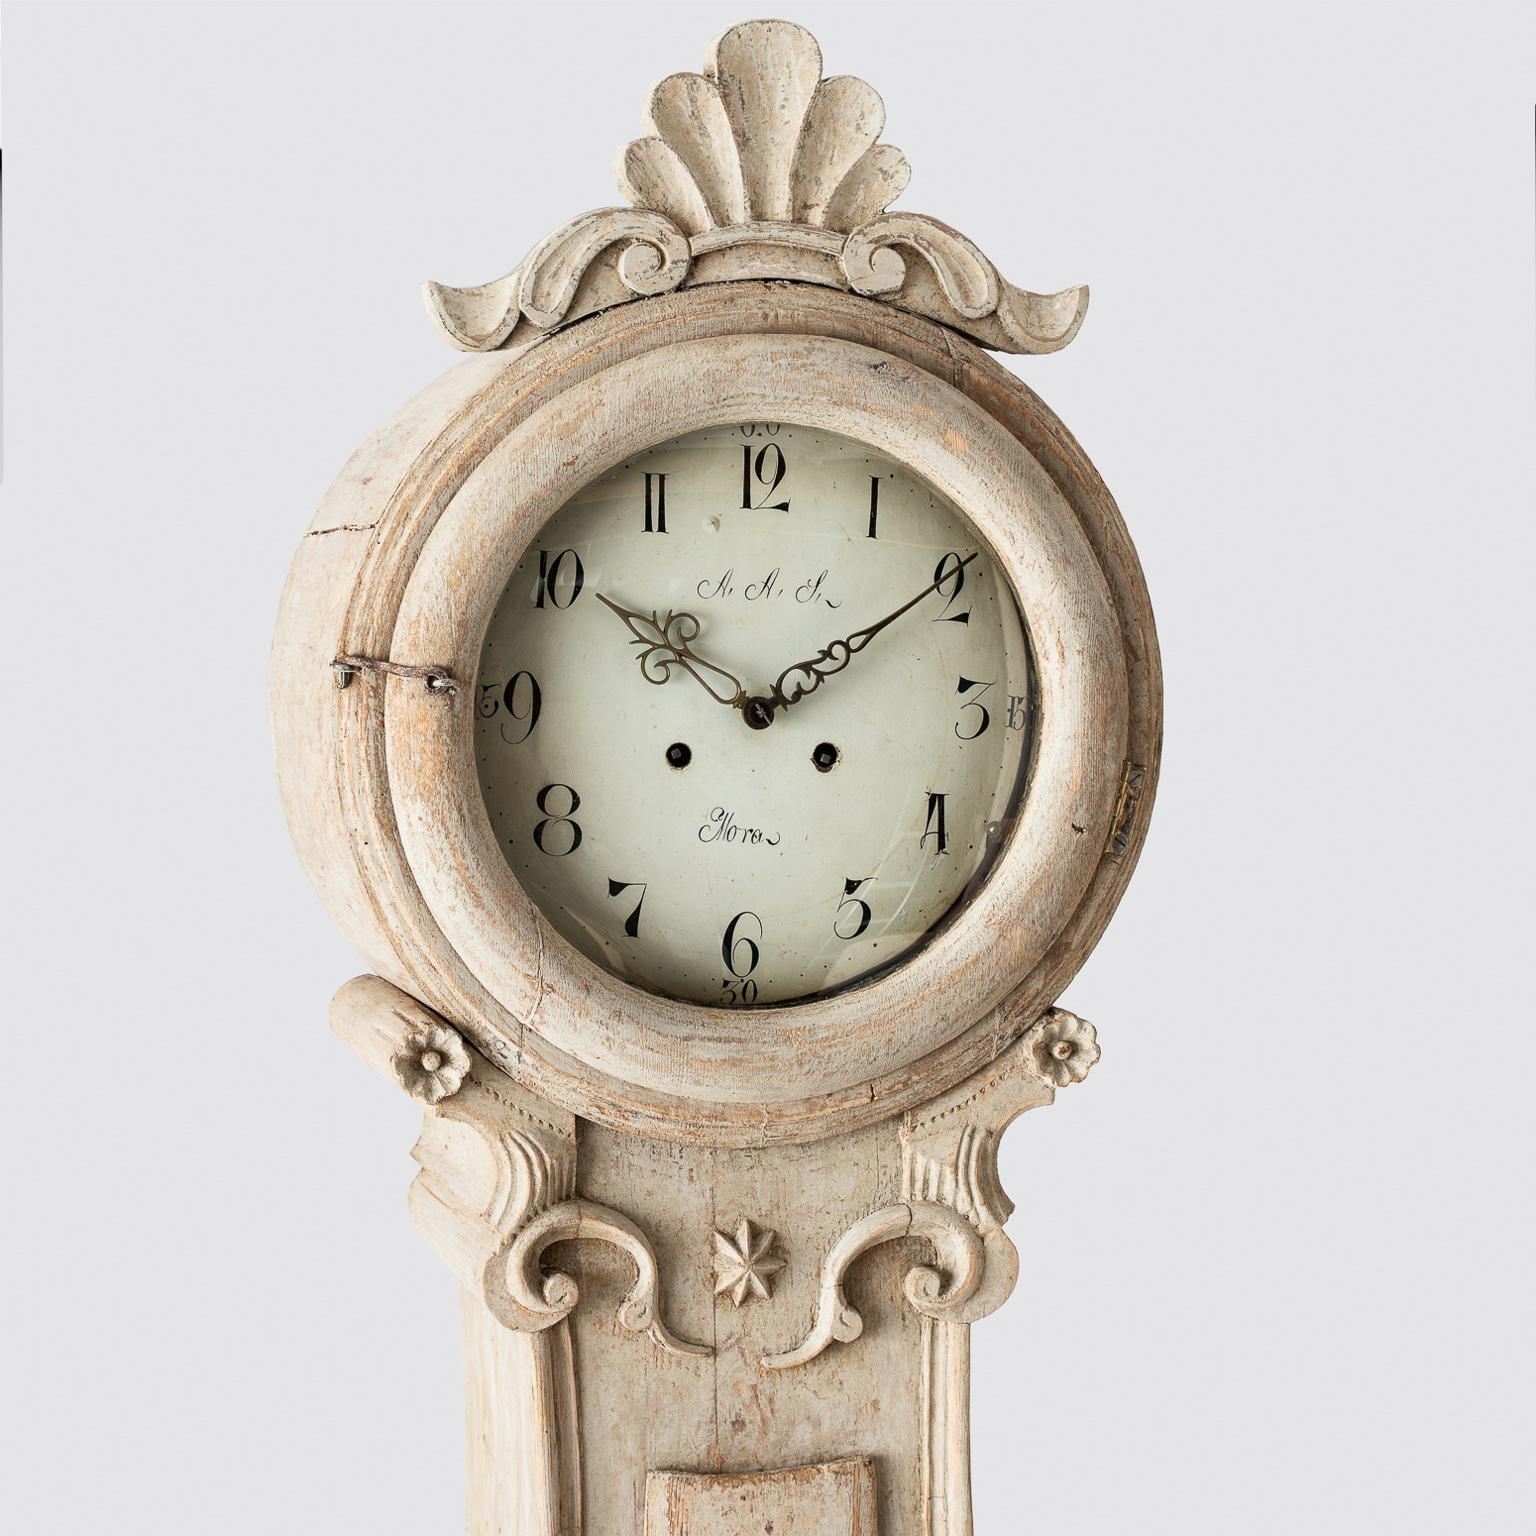 This Swedish Mora clock is typical of the rococo style with an elaborate crown in the form of a shell surrounded by other decorative details. The face of the clock is signed by Anders Anderson, one of the most highly respected clockmakers at the